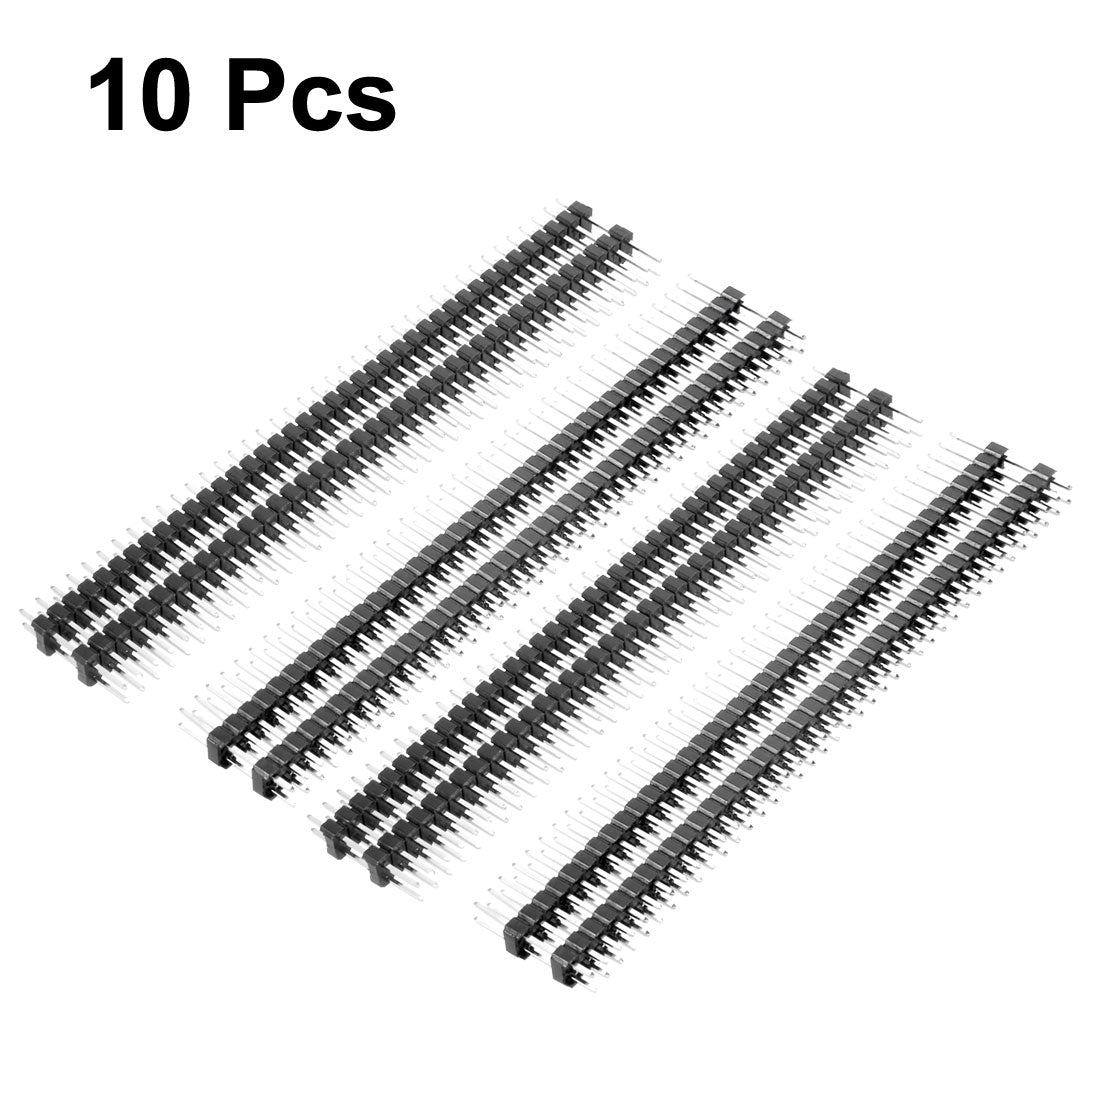 uxcell Uxcell 10Pcs 2.54mm Pitch 40-Pin 19mm Length 2 Row Straight Connector Pin Header Strip for Arduino Prototype Shield